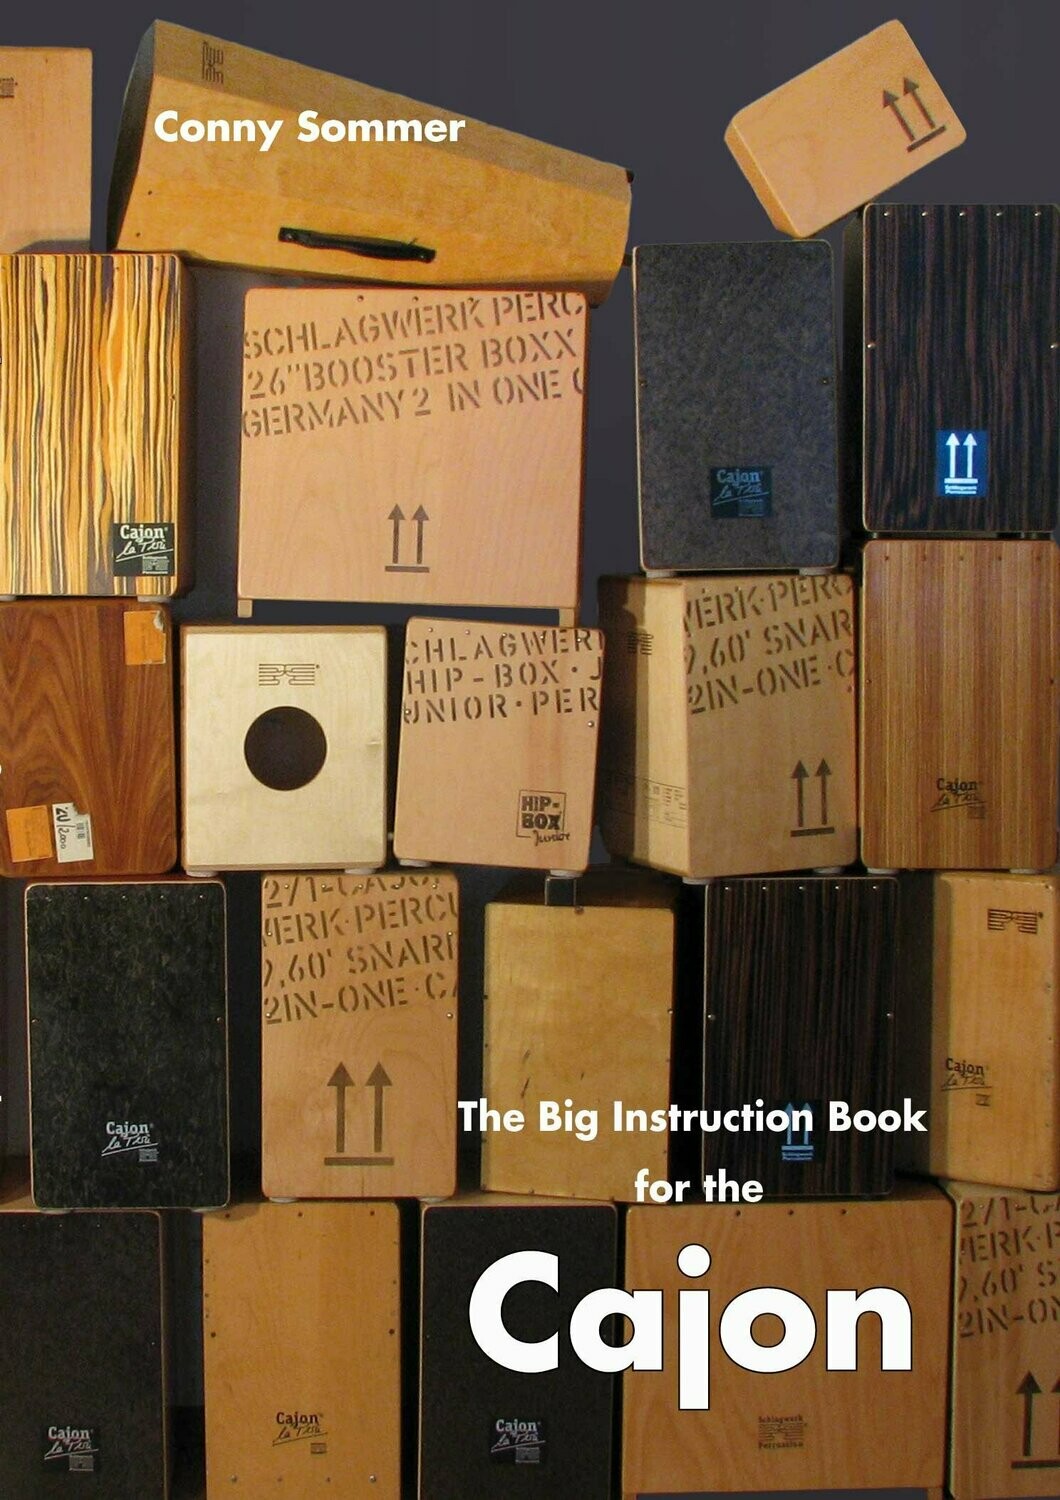 The Big Instructional Book for the Cajon